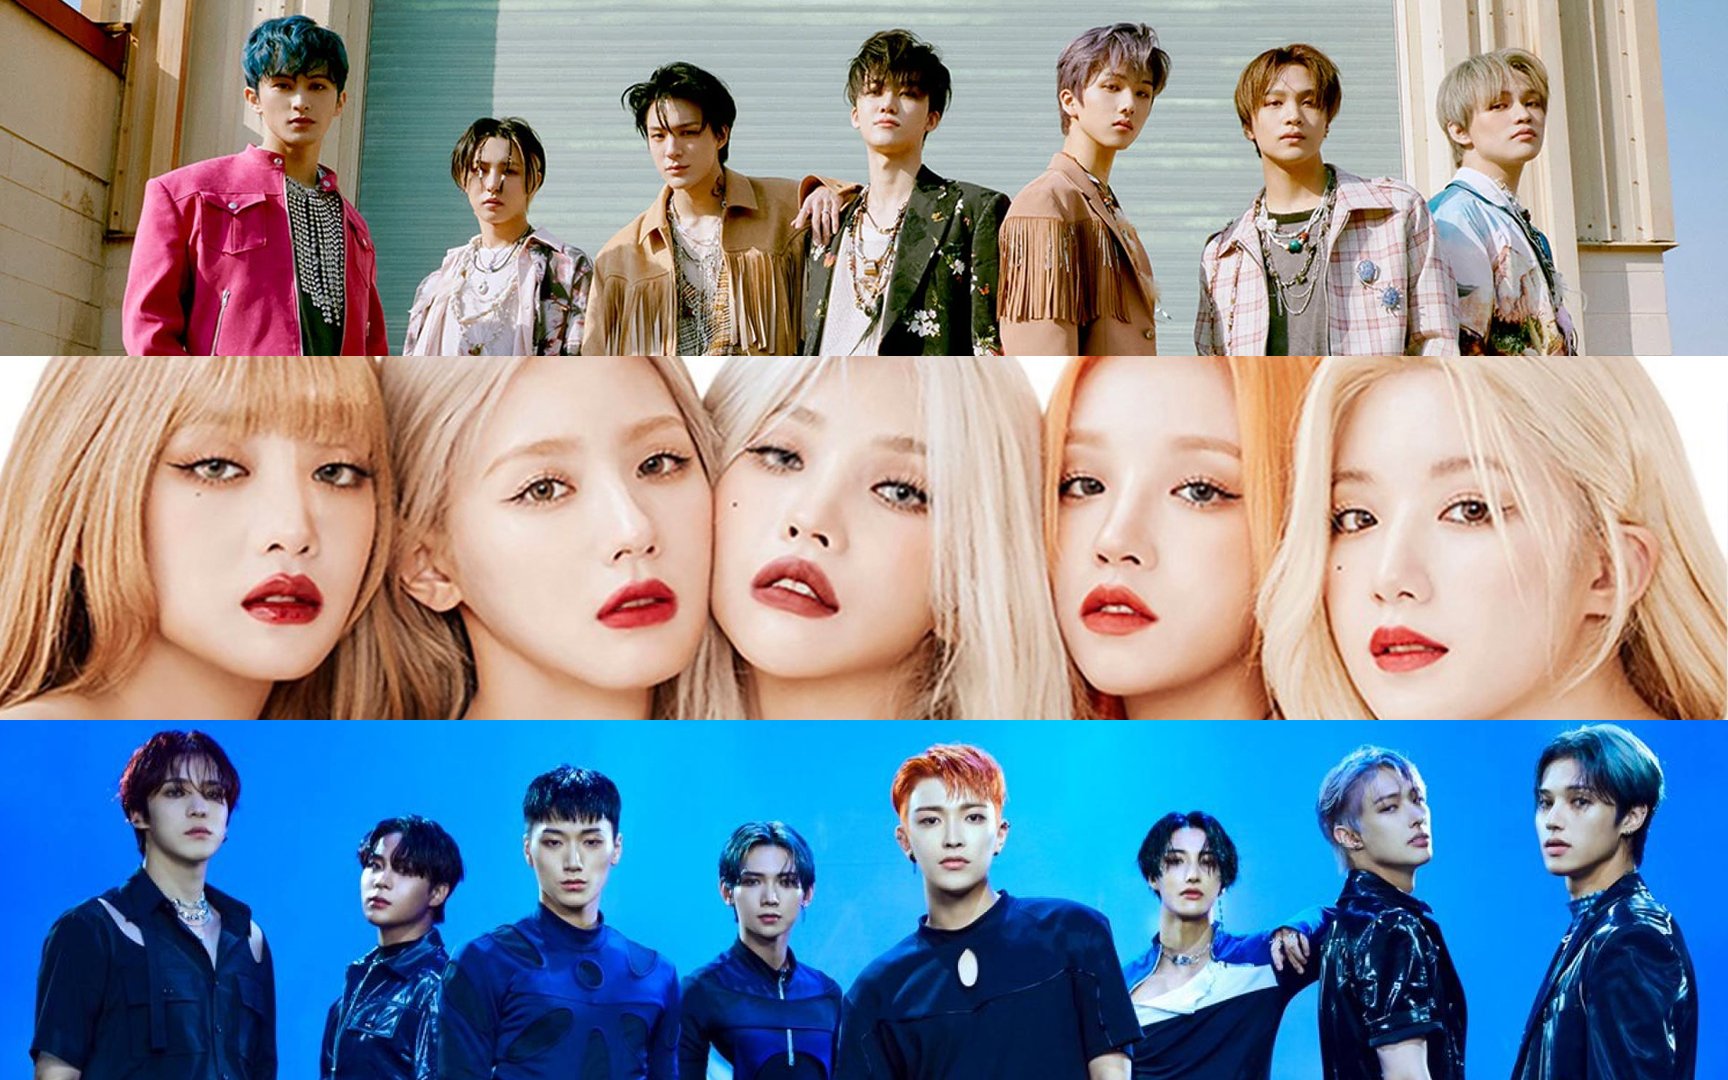 The 2022 SBS Gayo Daejun reveals the full artist lineup including NCT Dream, (G)I-DLE, ATEEZ, and more